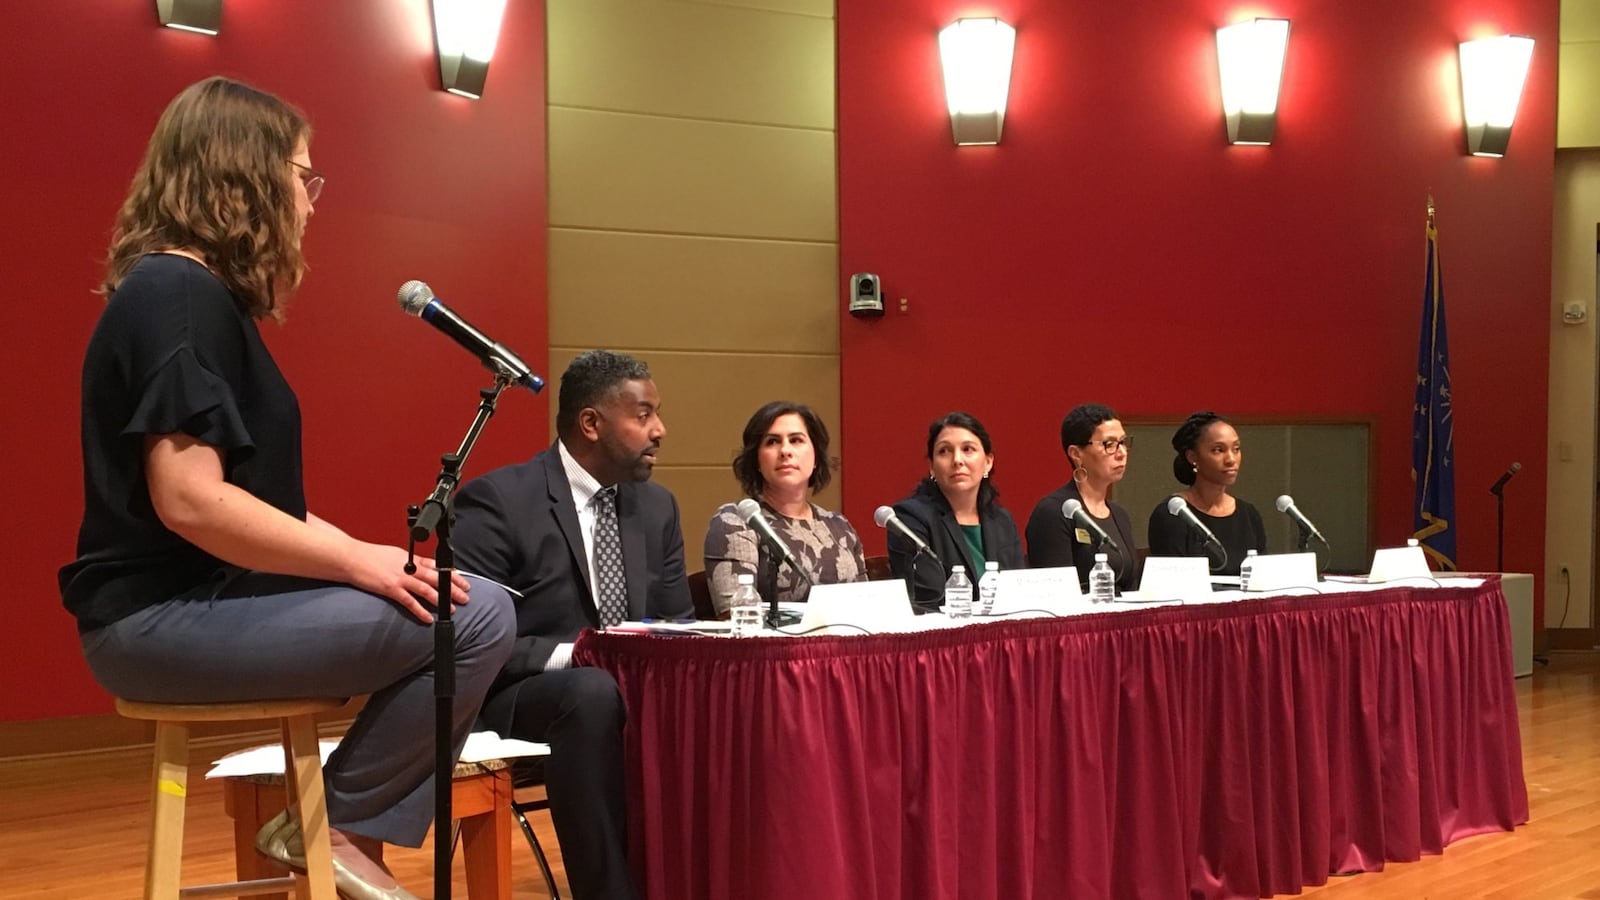 Candidates for the District 3 and District 5 seats on the Indianapolis Public Schools Board debated at a forum hosted Tuesday night by Chalkbeat, the Indianapolis Recorder, WFYI, and the Central Library.